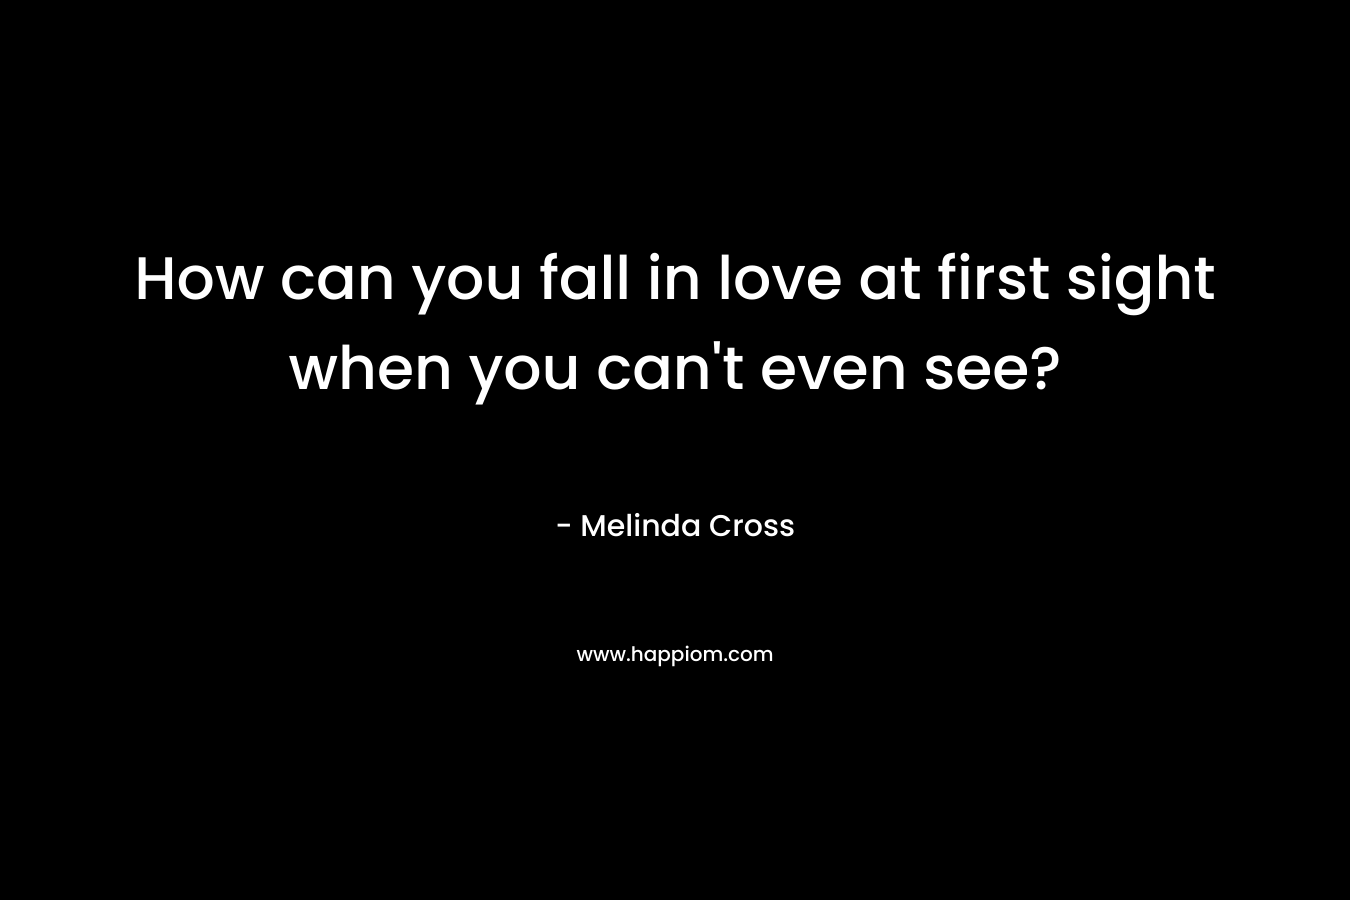 How can you fall in love at first sight when you can't even see?